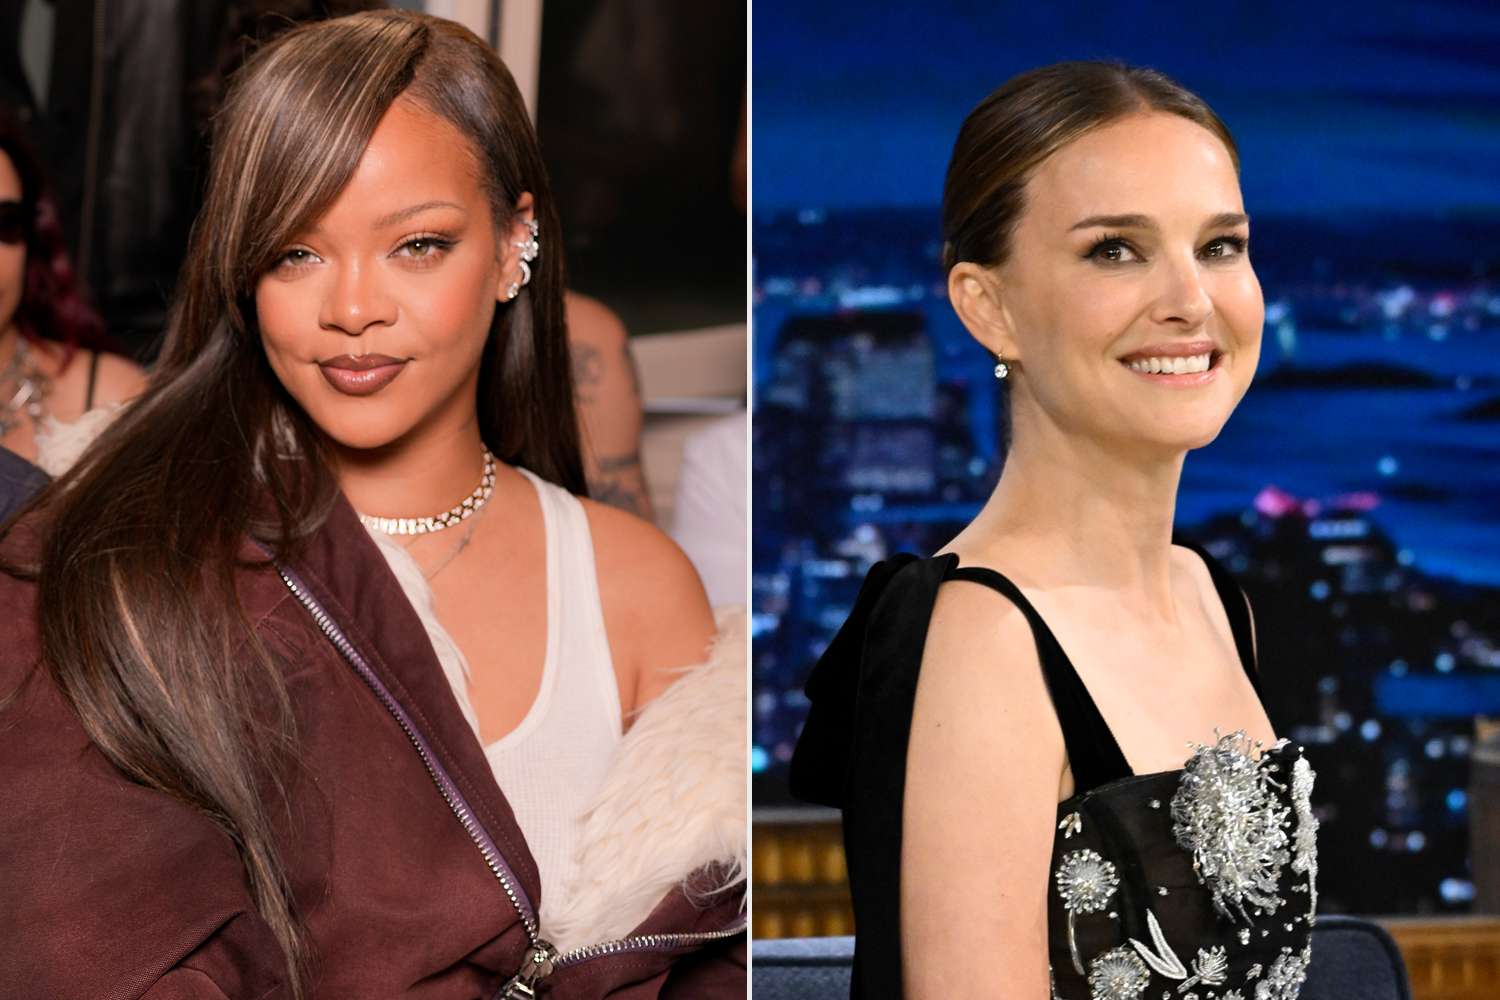 Natalie Portman says Rihanna calling her a 'bad bitch' helped her through divorce: 'Exactly what I needed'